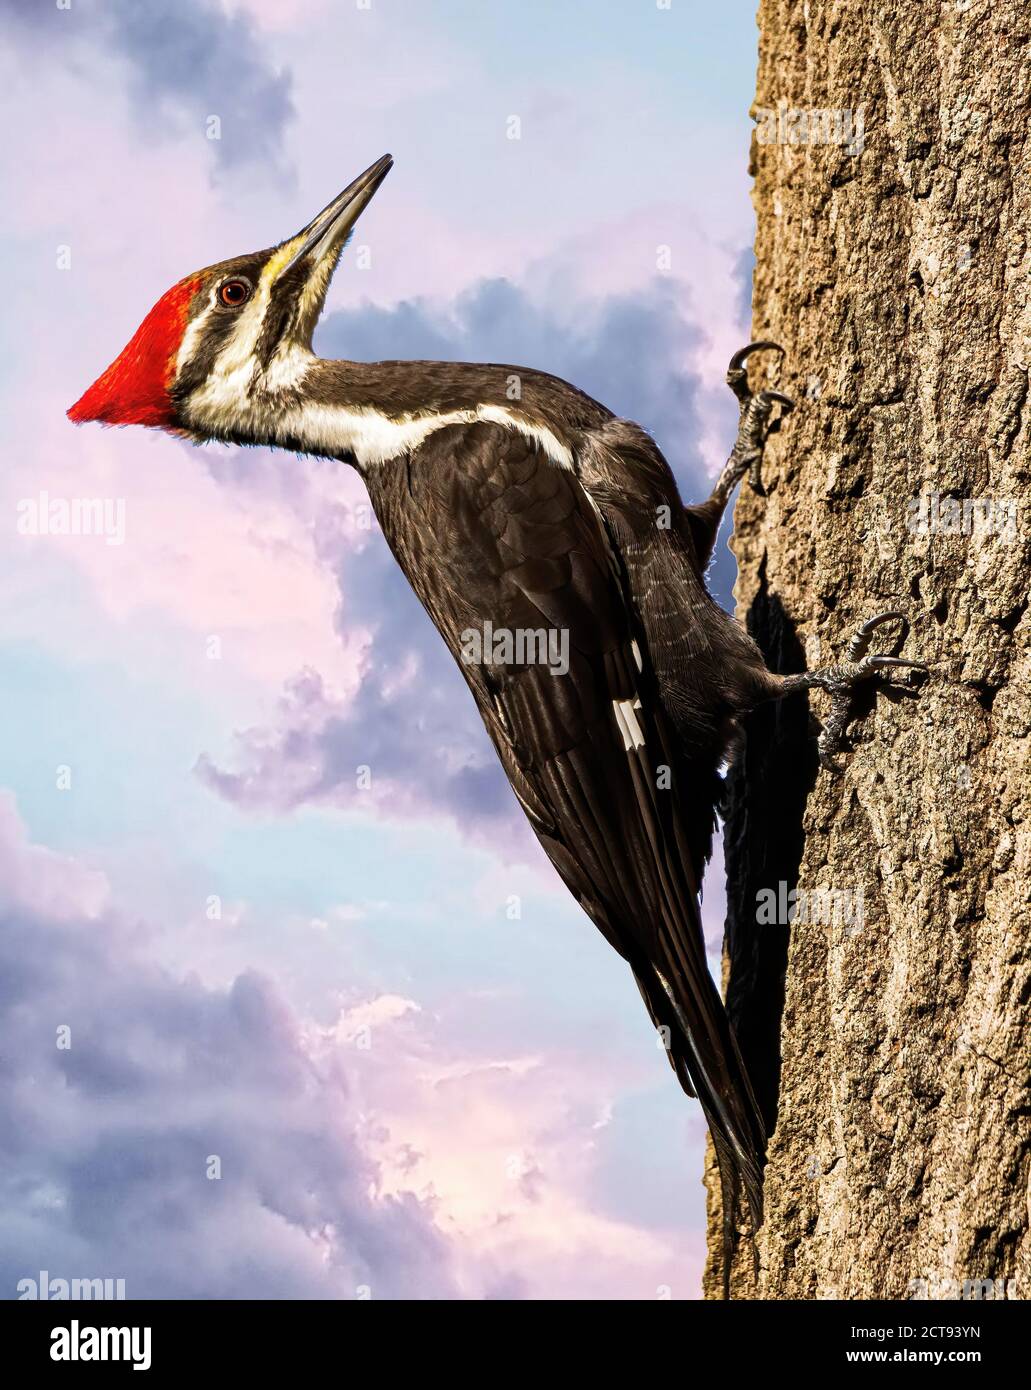 A beautiful pileated woodpecker clinging to a tree. Stock Photo